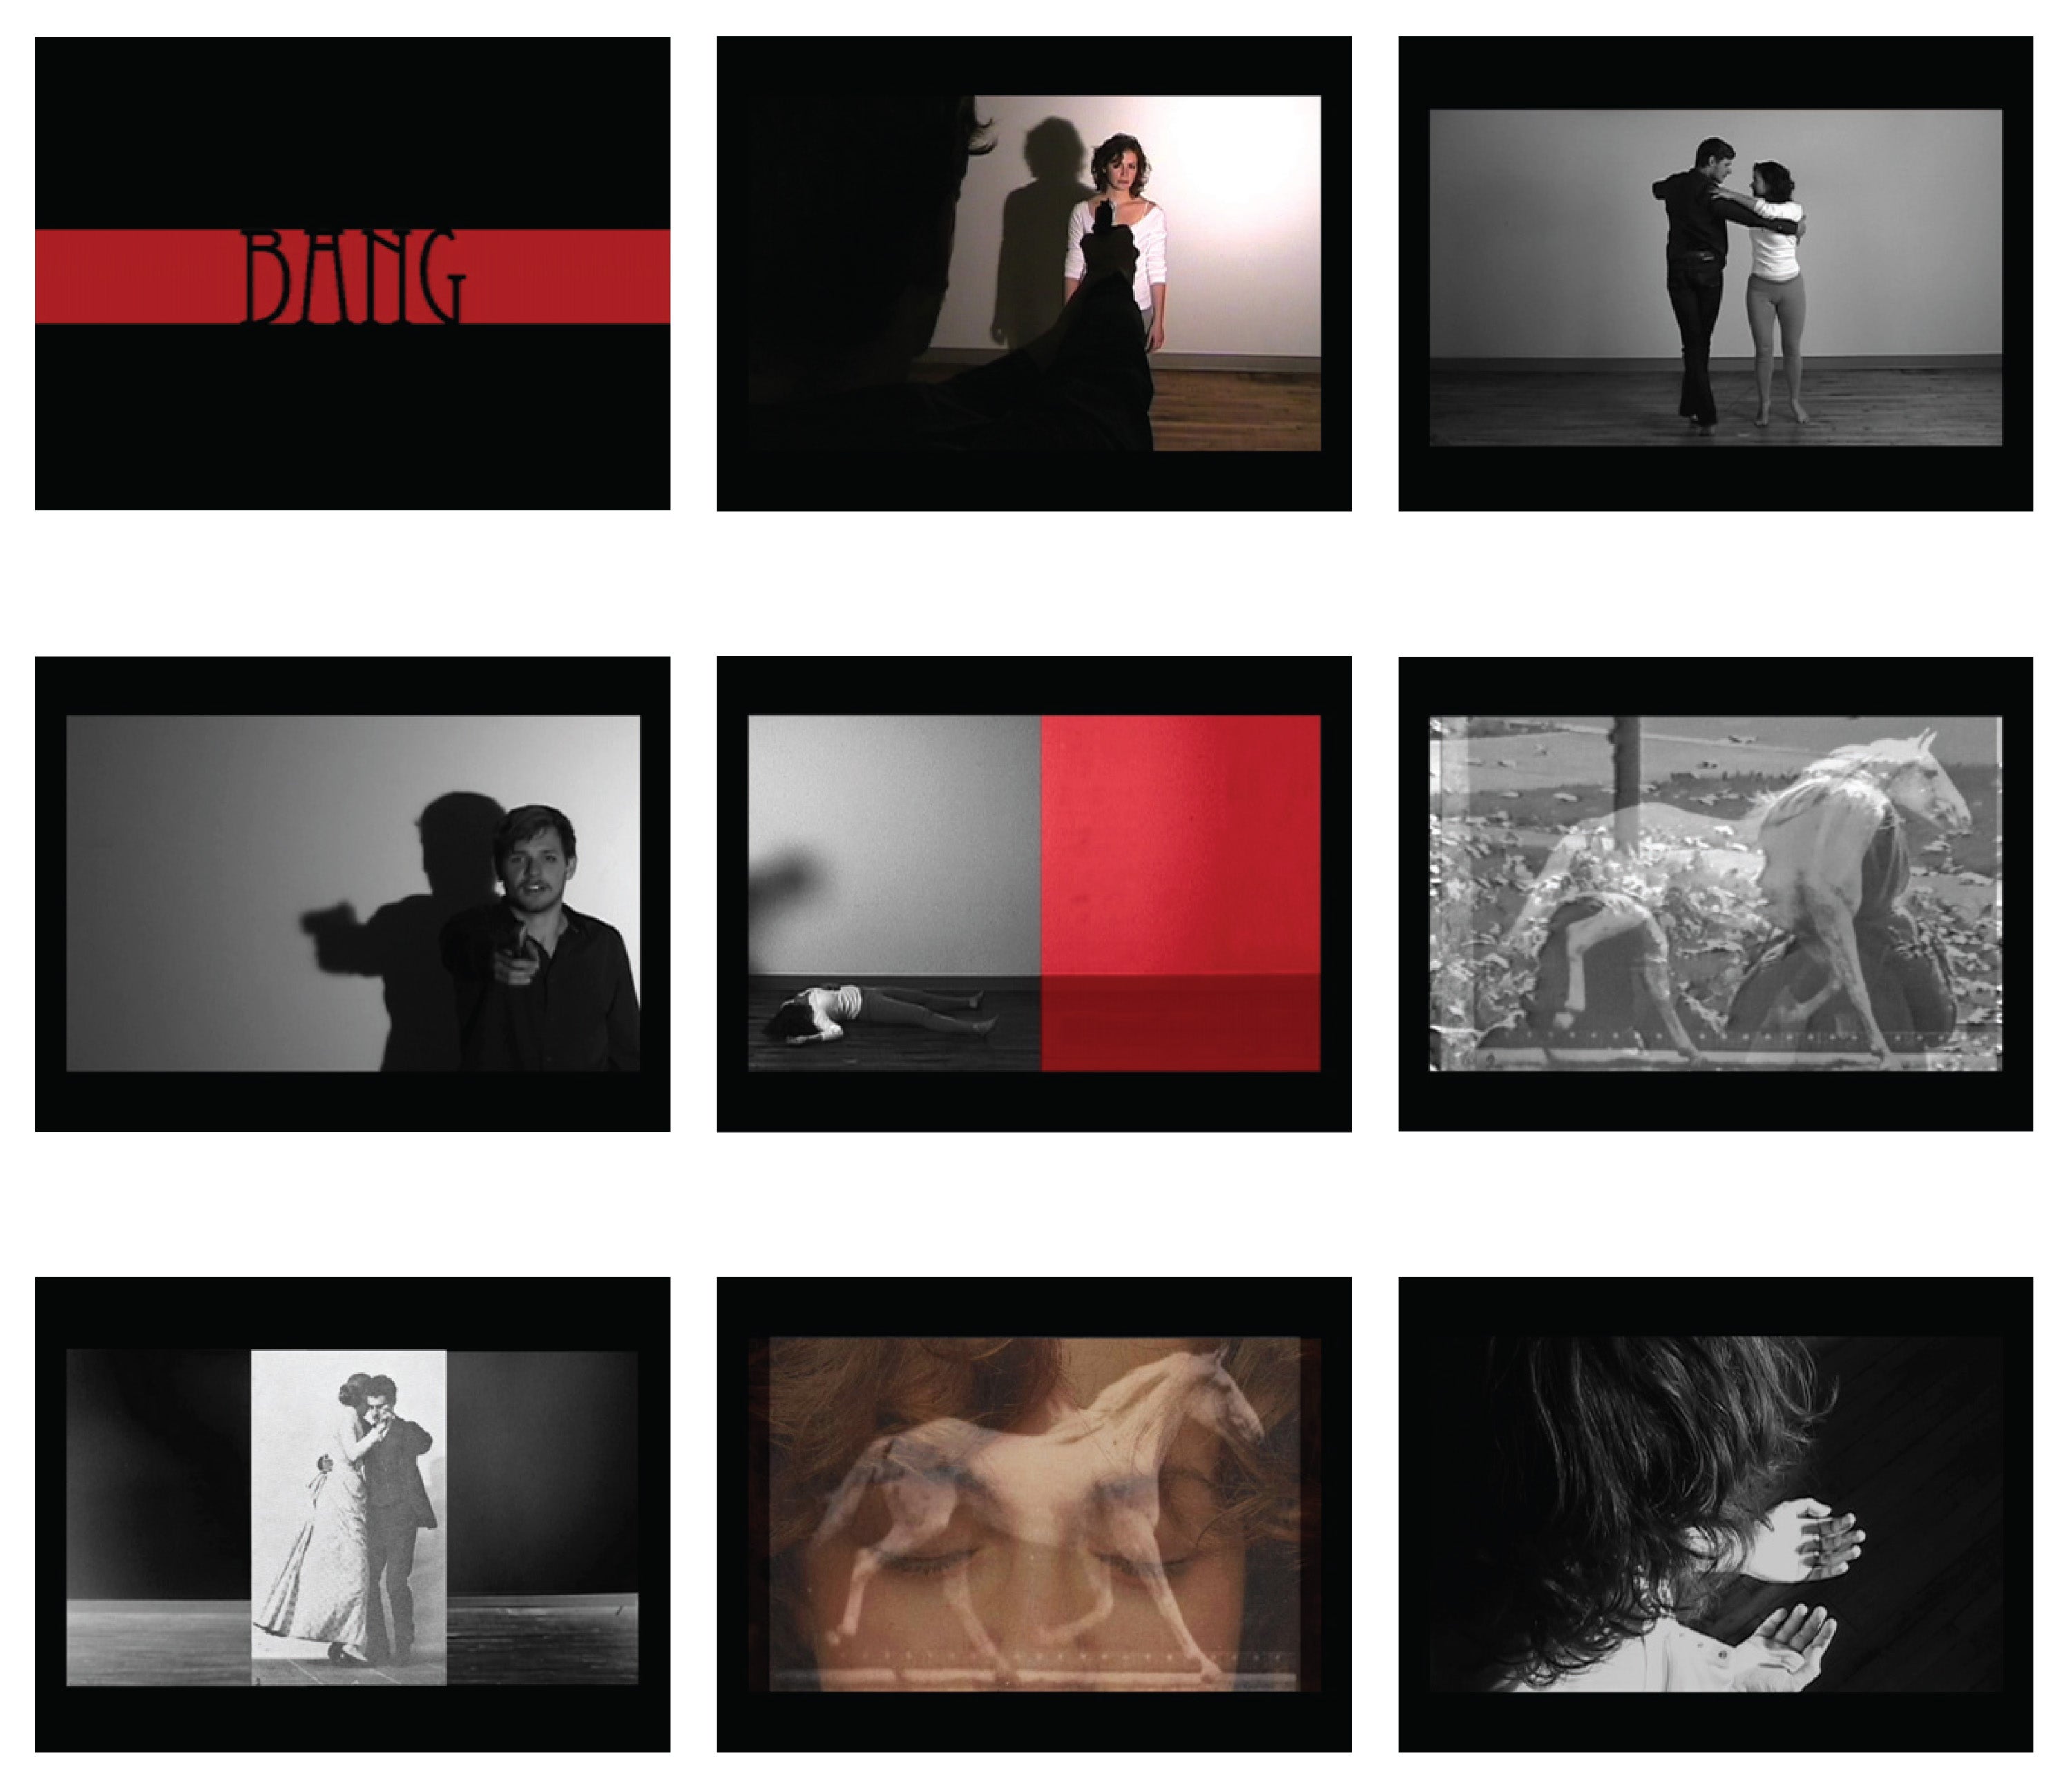 Several image stills of a film footage. These are mostly black, white and red images of two people, a horse, and texts.